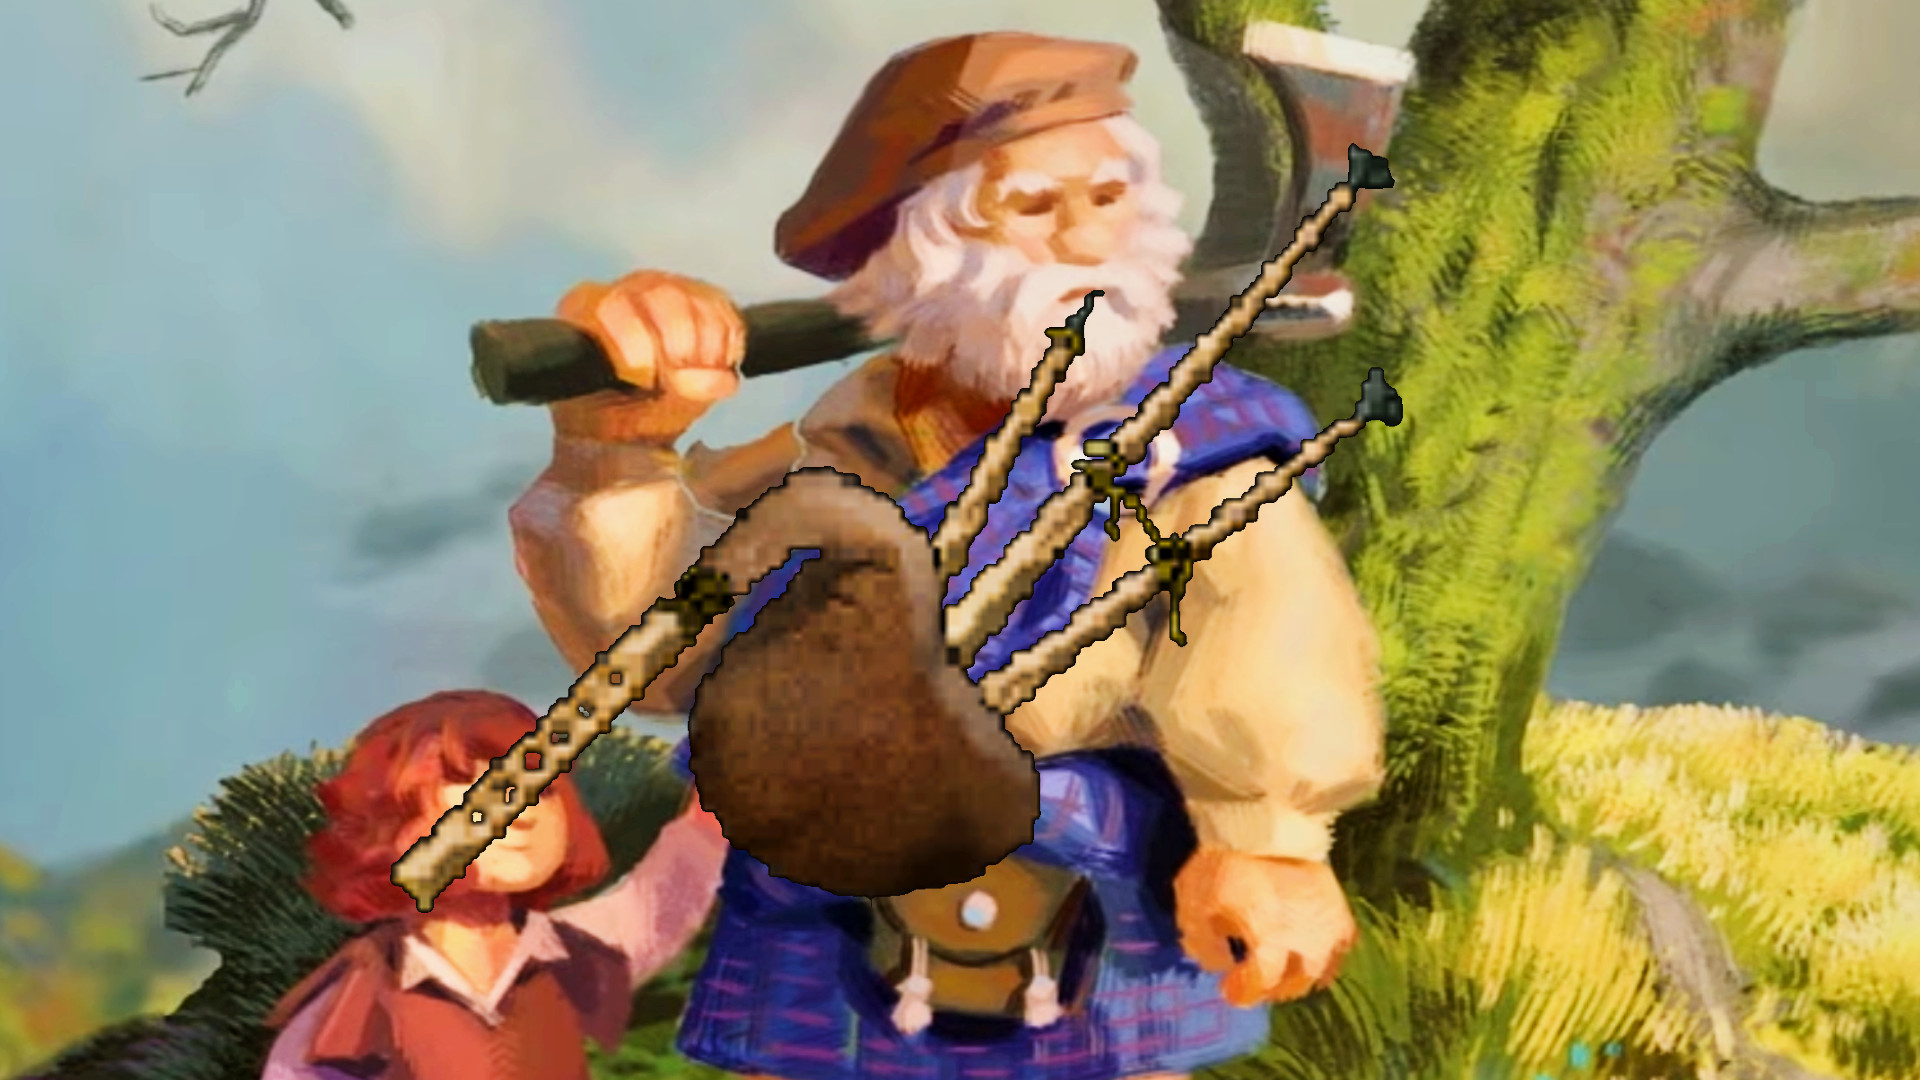 Scottish medieval city builder Clanfolk adds bogs and bagpipes